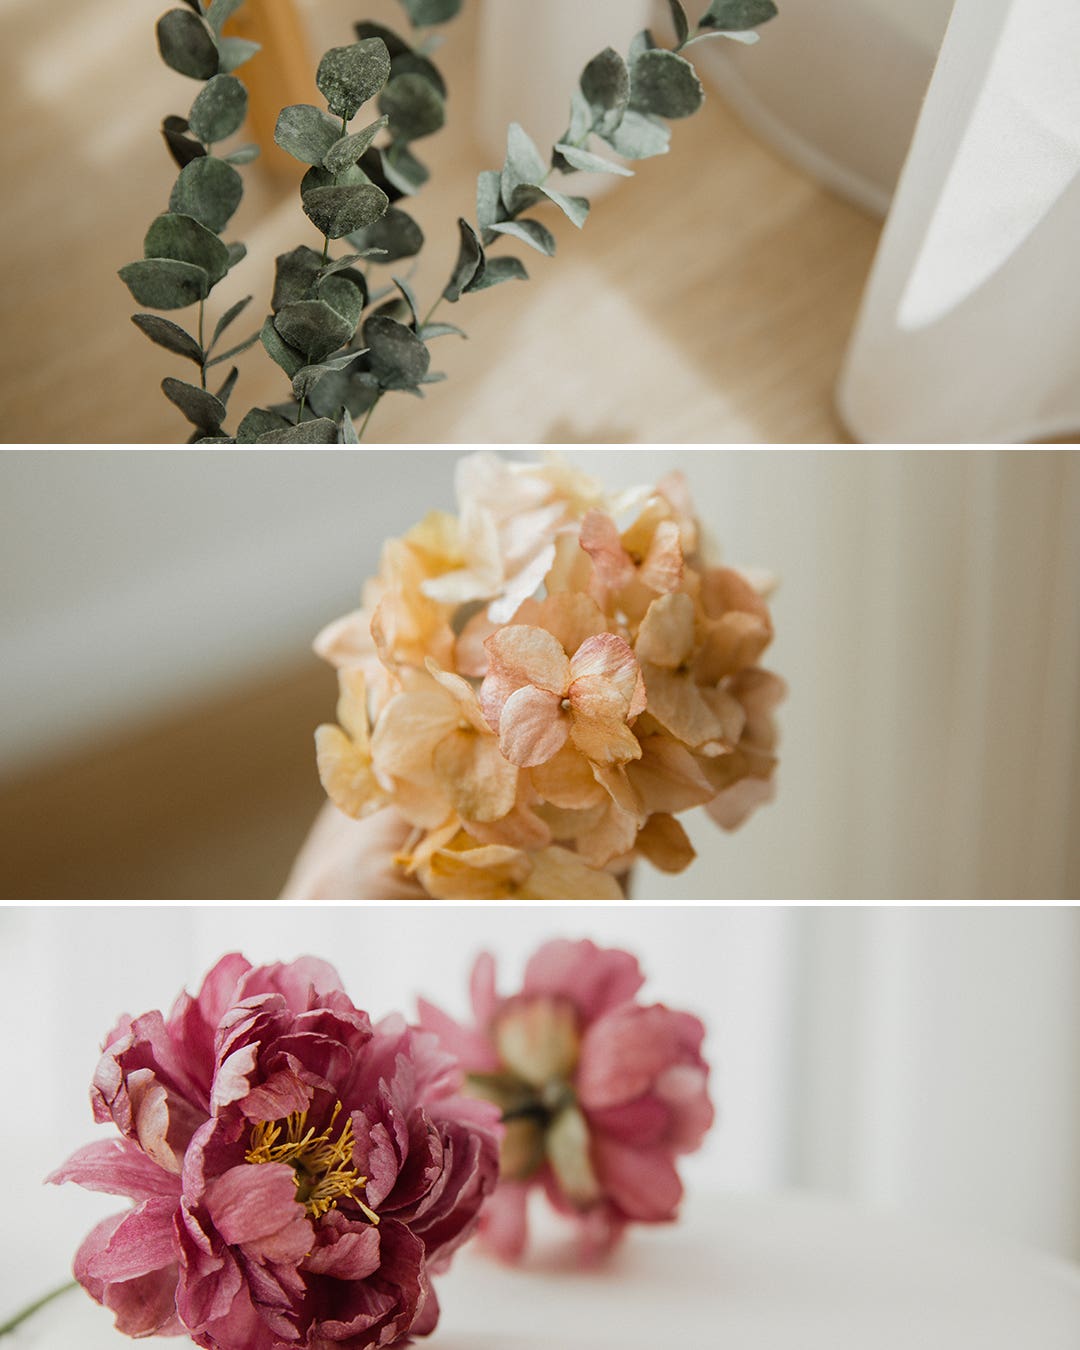 Wafer Paper Flowers: How to Make and Store Them [+Tutorials